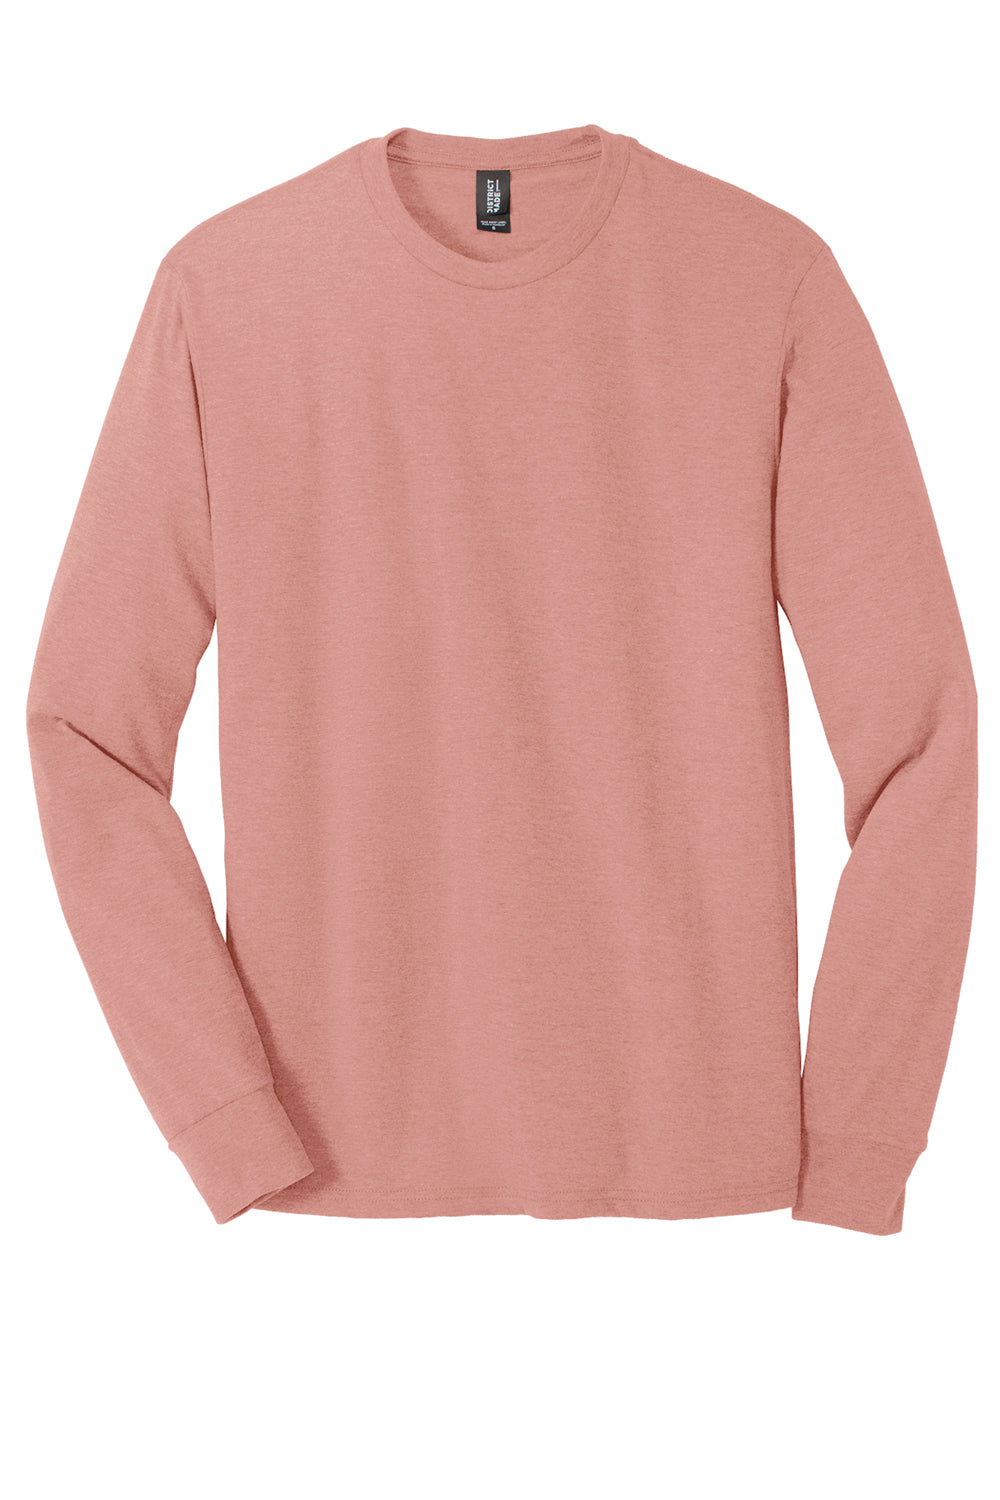 District Mens Perfect Tri Long Sleeve Crewneck T-Shirt Blush Pink Frost Flat Front